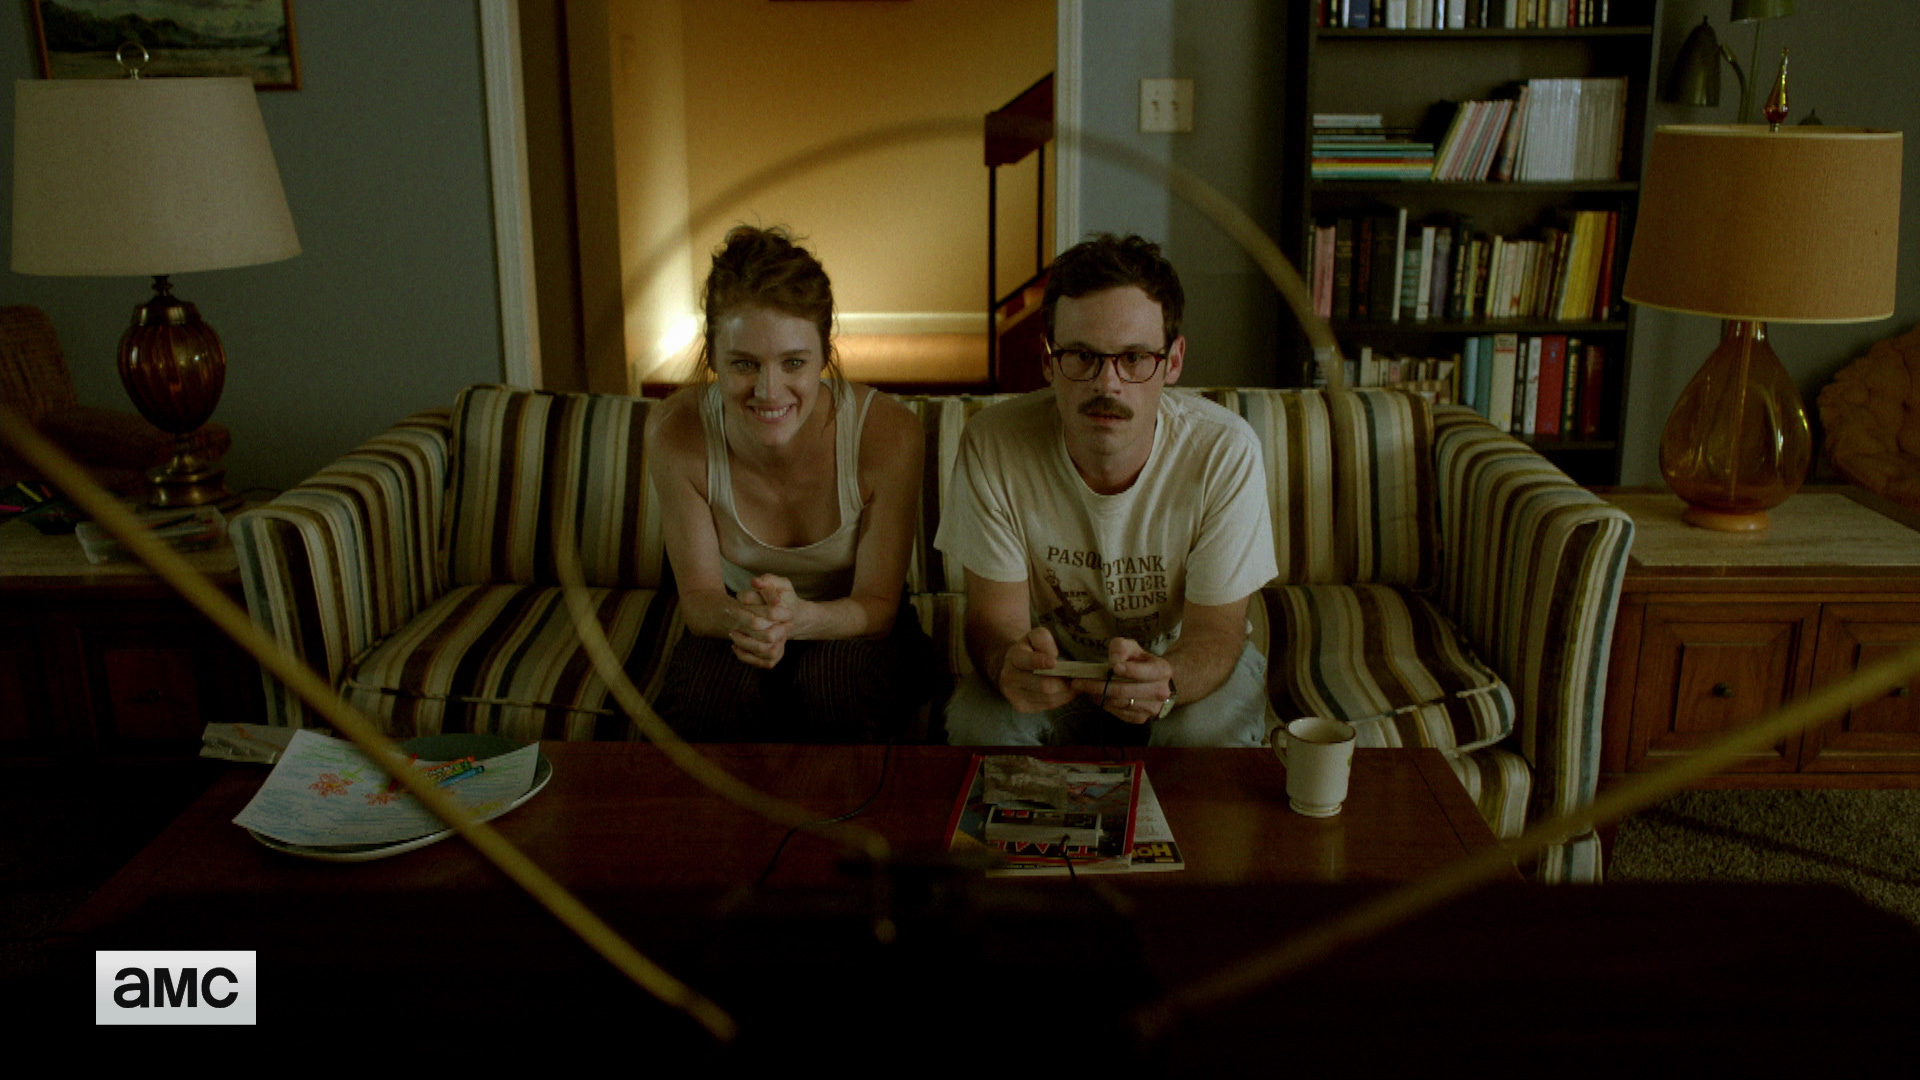 Cameron and Gordon sitting and playing Super Mario NES in a still from Halt and Catch Fire